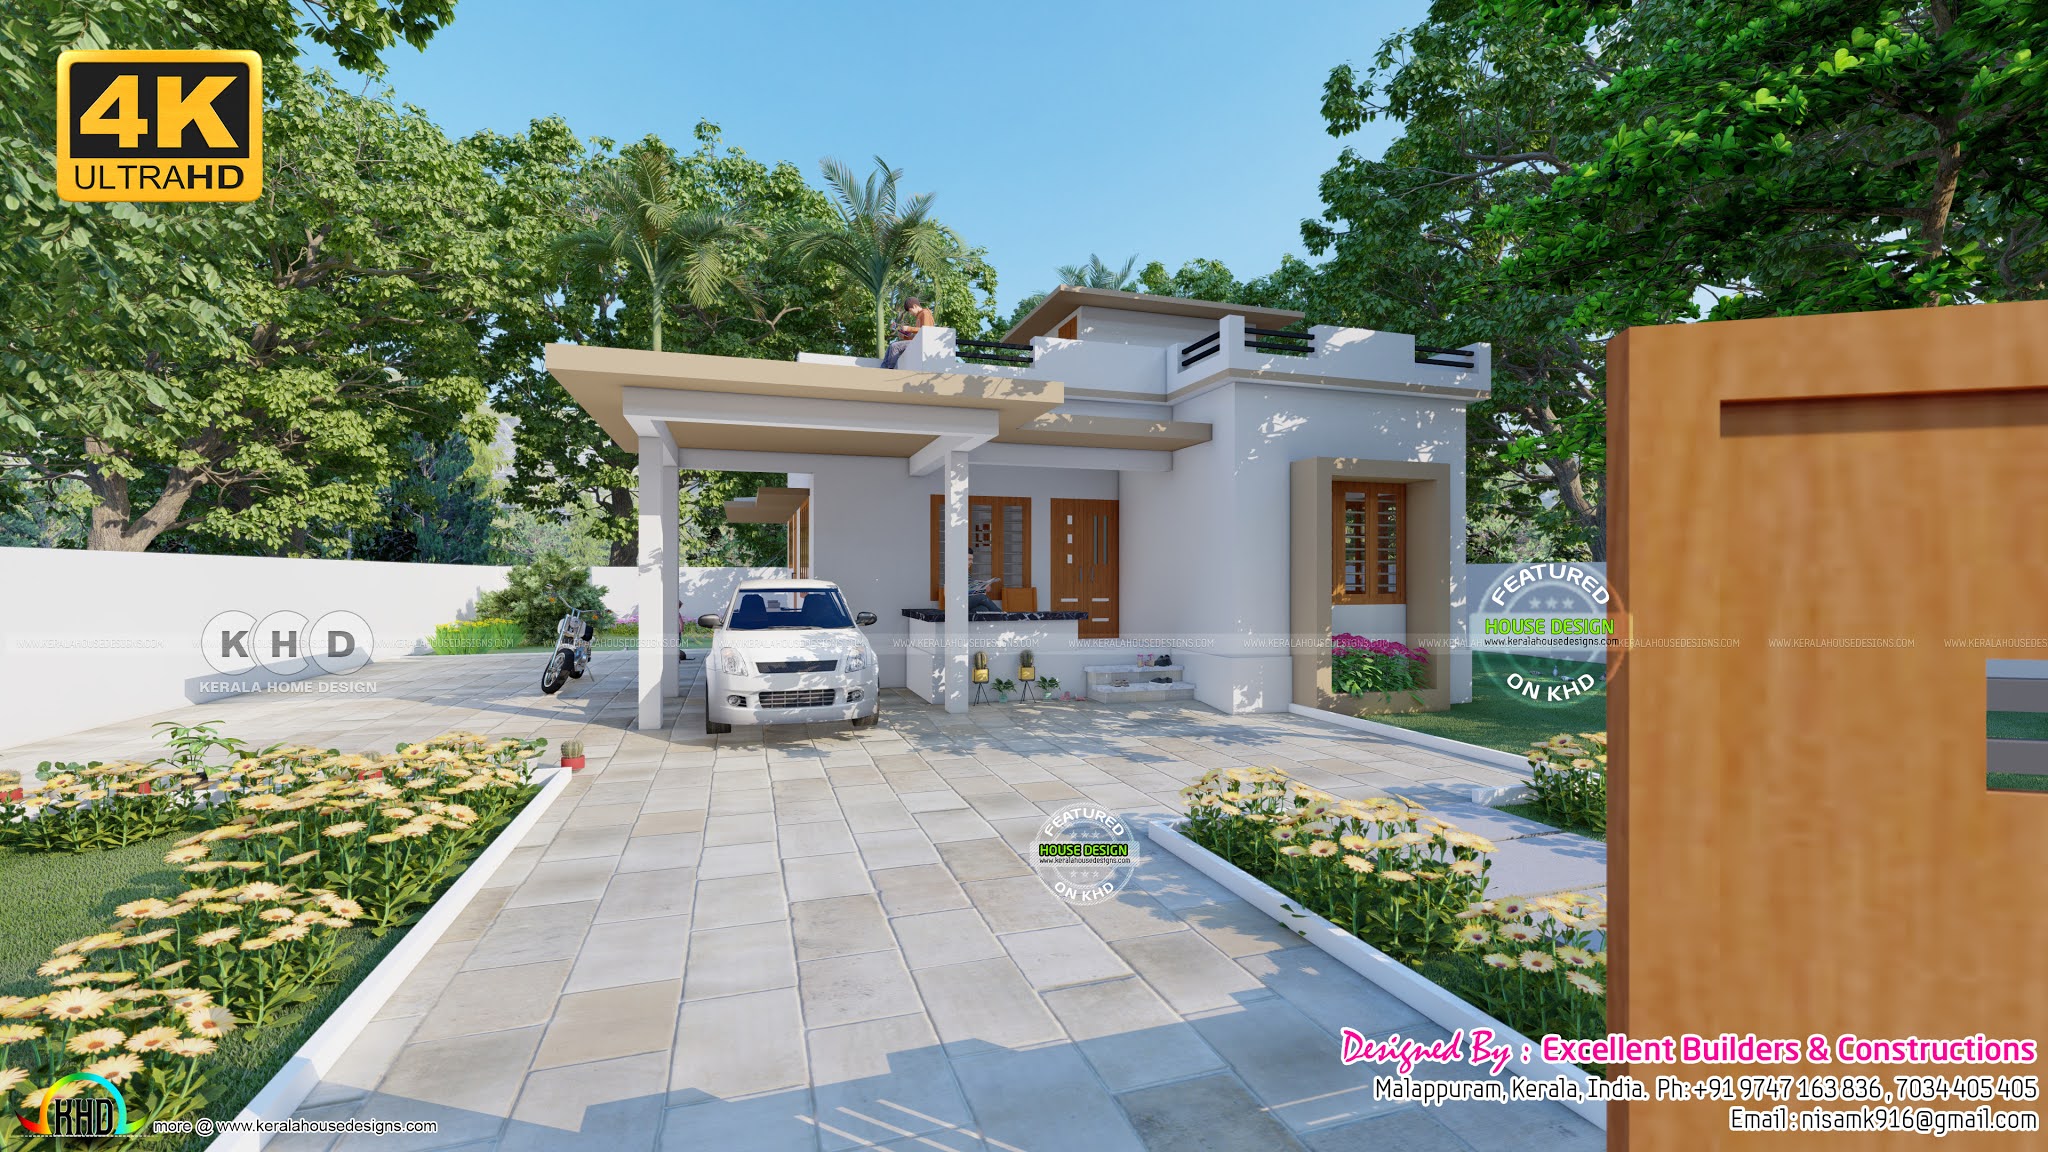 11 To 15 Lakhs Cost Estimated Small Budget House Kerala Home Design And Floor Plans 8000 Houses